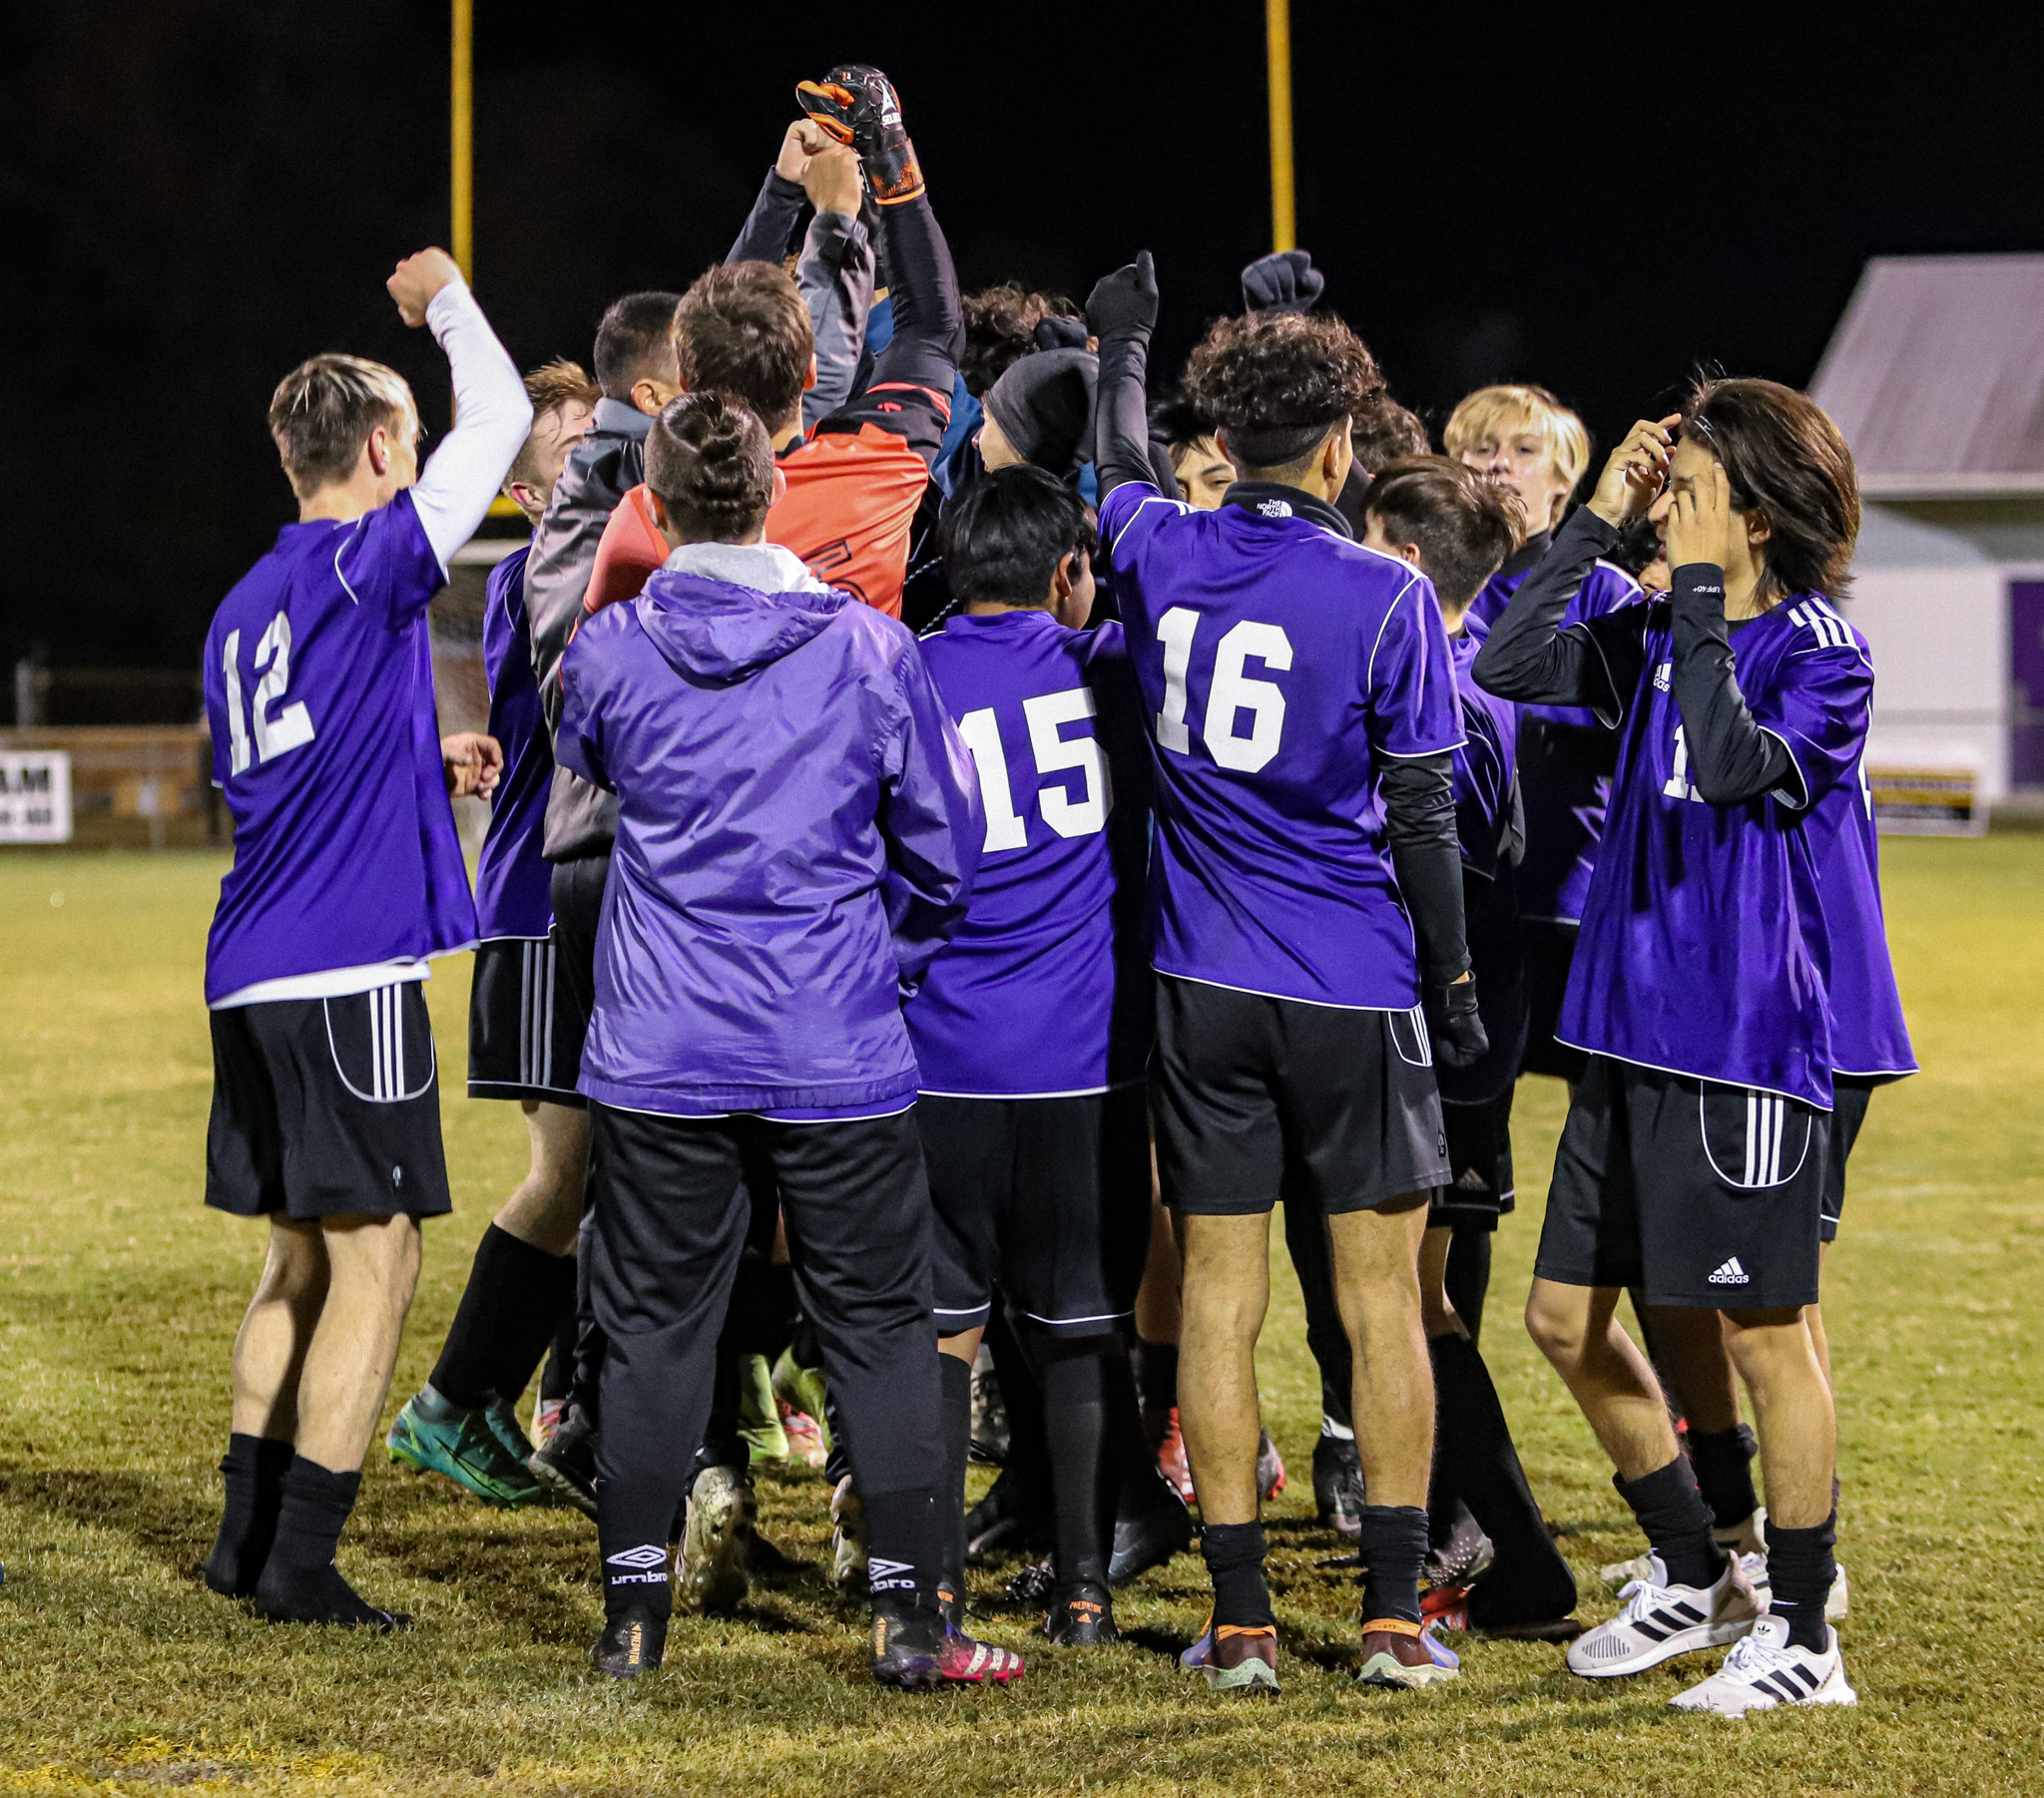 Boys Soccer: Rosewood Advances To Third Round For Third Straight Season (PHOTO GALLERY)